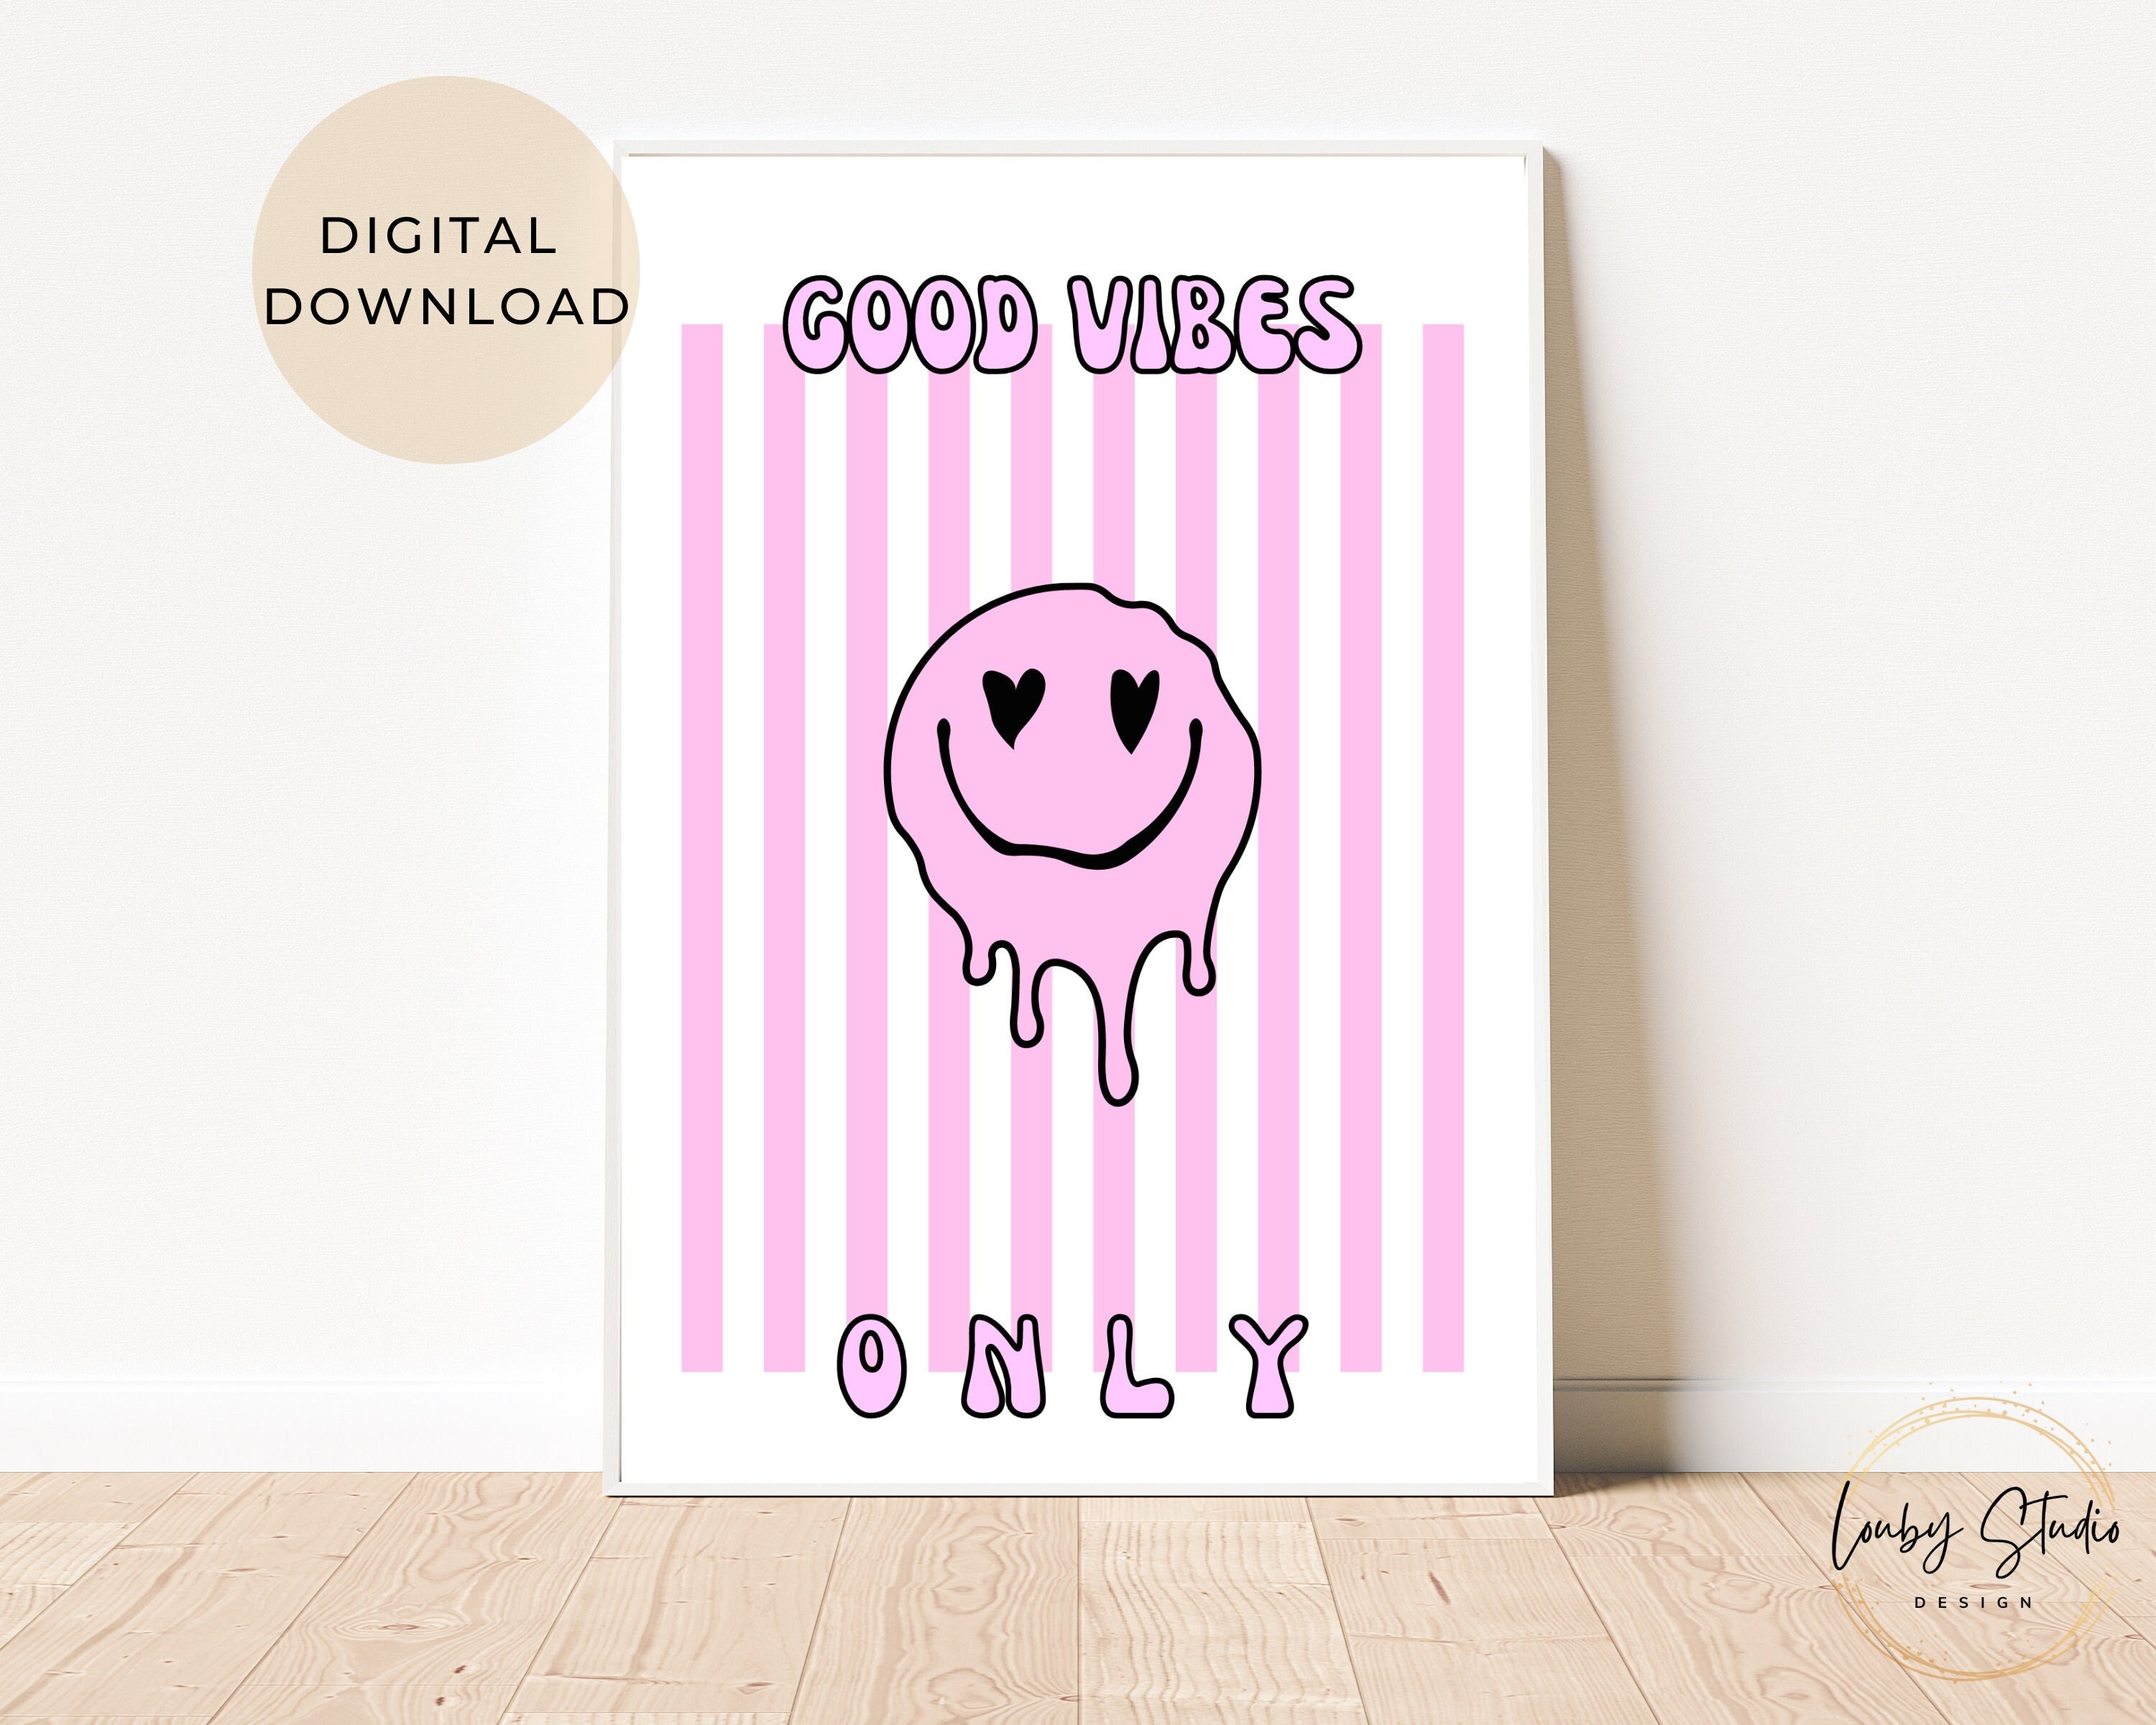  Cool Vintage Happy Smile Faces Picture - Retro Cute Poster -  Postive Quotes Wall Art Print - Hippie Indie Kidcore Room Decor - 60s 70s  80s Groovy Mushroom Decoration - Stay